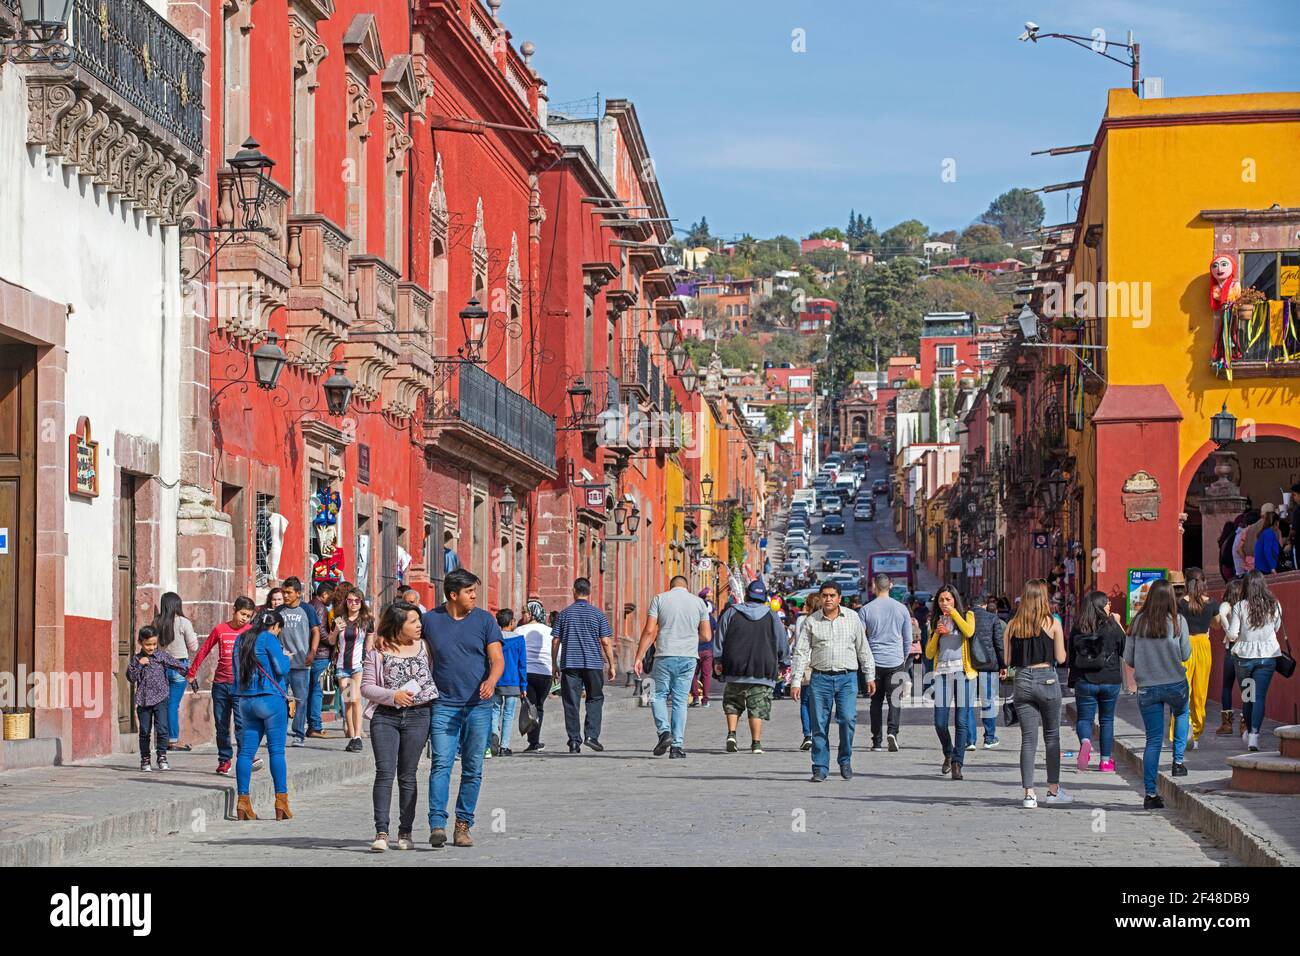 Mexican tourists walking in street with colourful houses, restaurants and shops in the city San Miguel de Allende, Guanajuato, Central Mexico Stock Photo